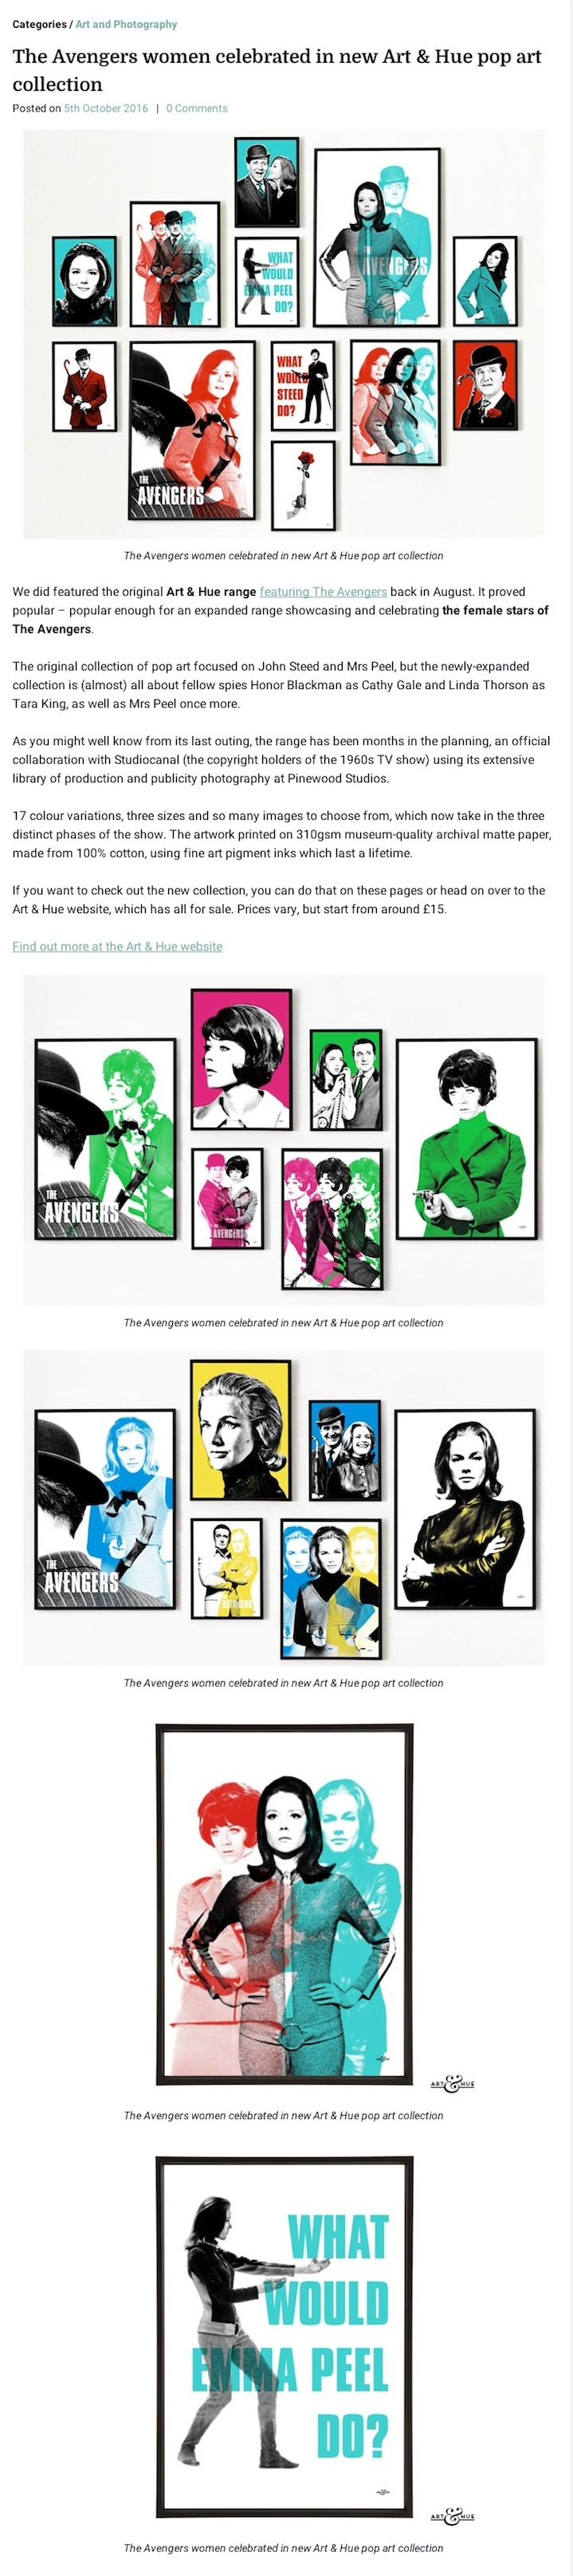 Art & Hue's official pop art range featuring The Avengers women is now available to buy.